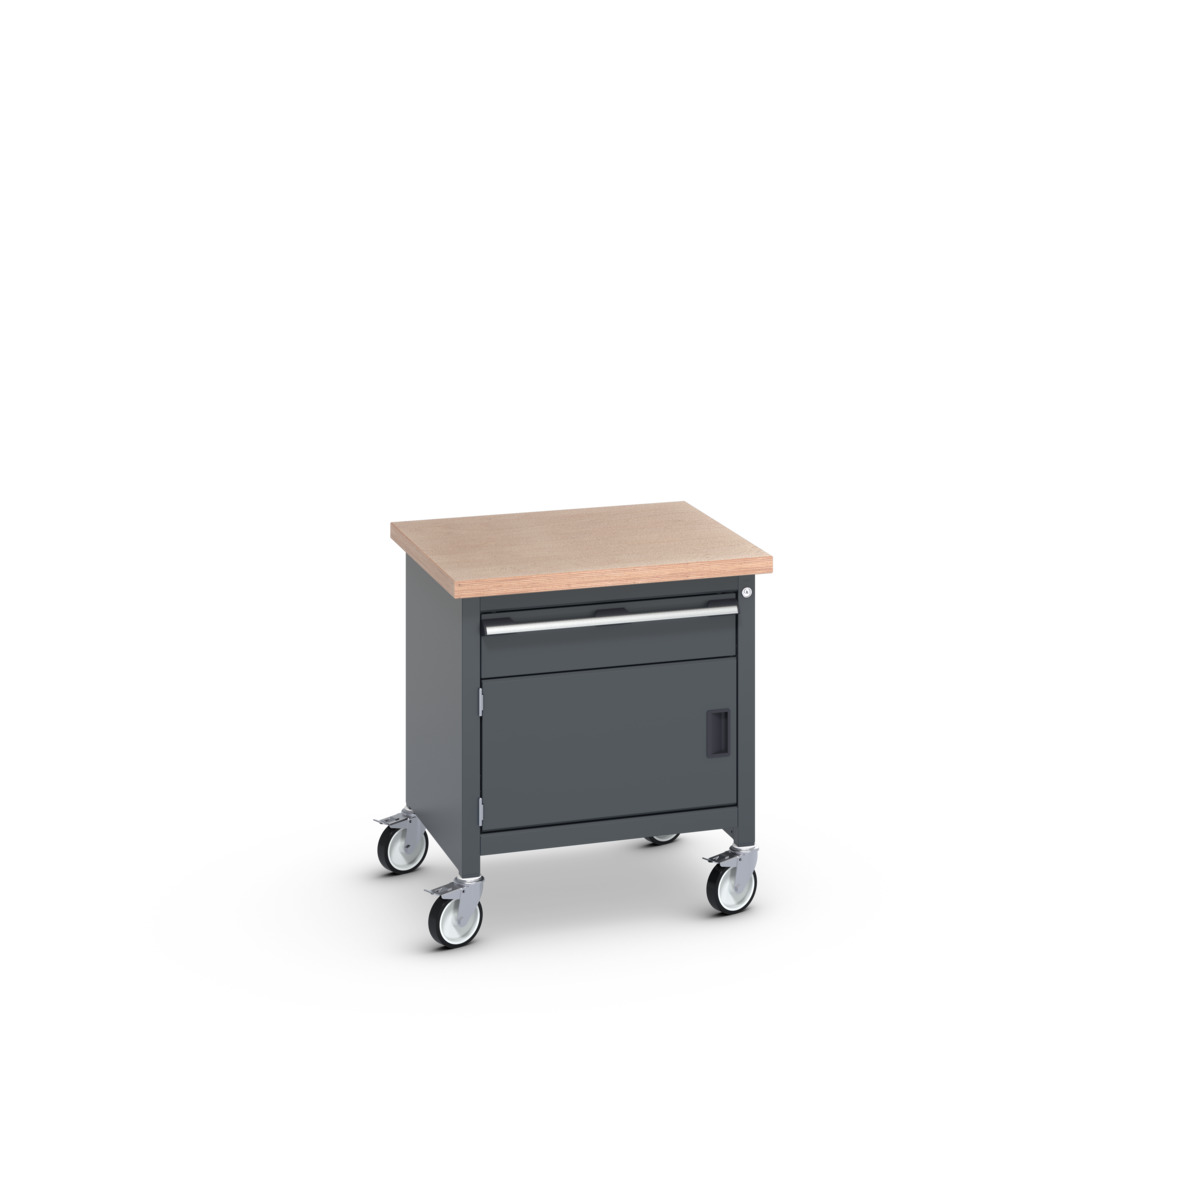 41002088.77V - cubio mobile storage bench (mpx)